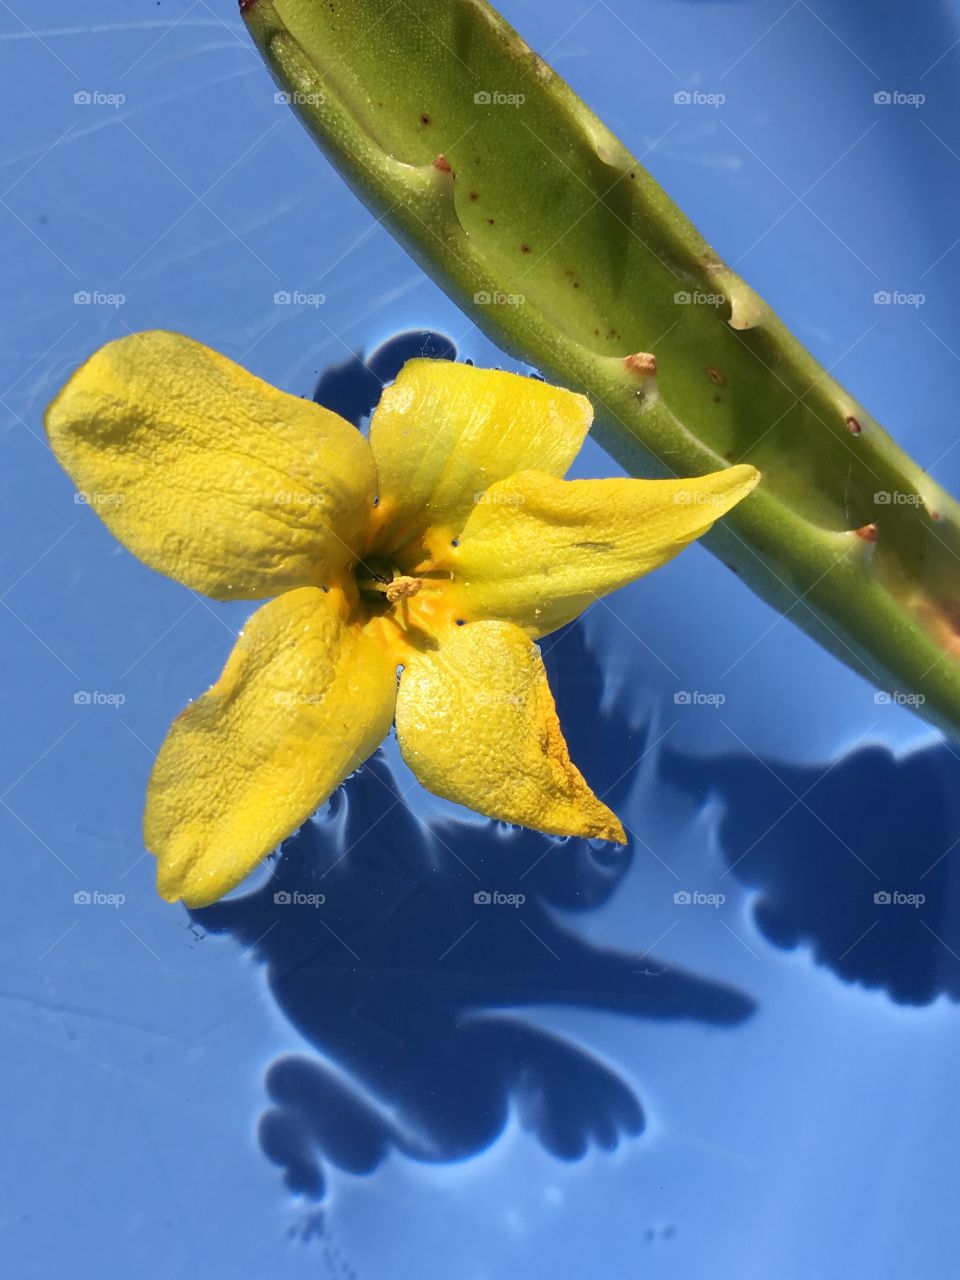 Yellow Forsythia flower with green Aloe Vera leaf floating on water in blue bowl